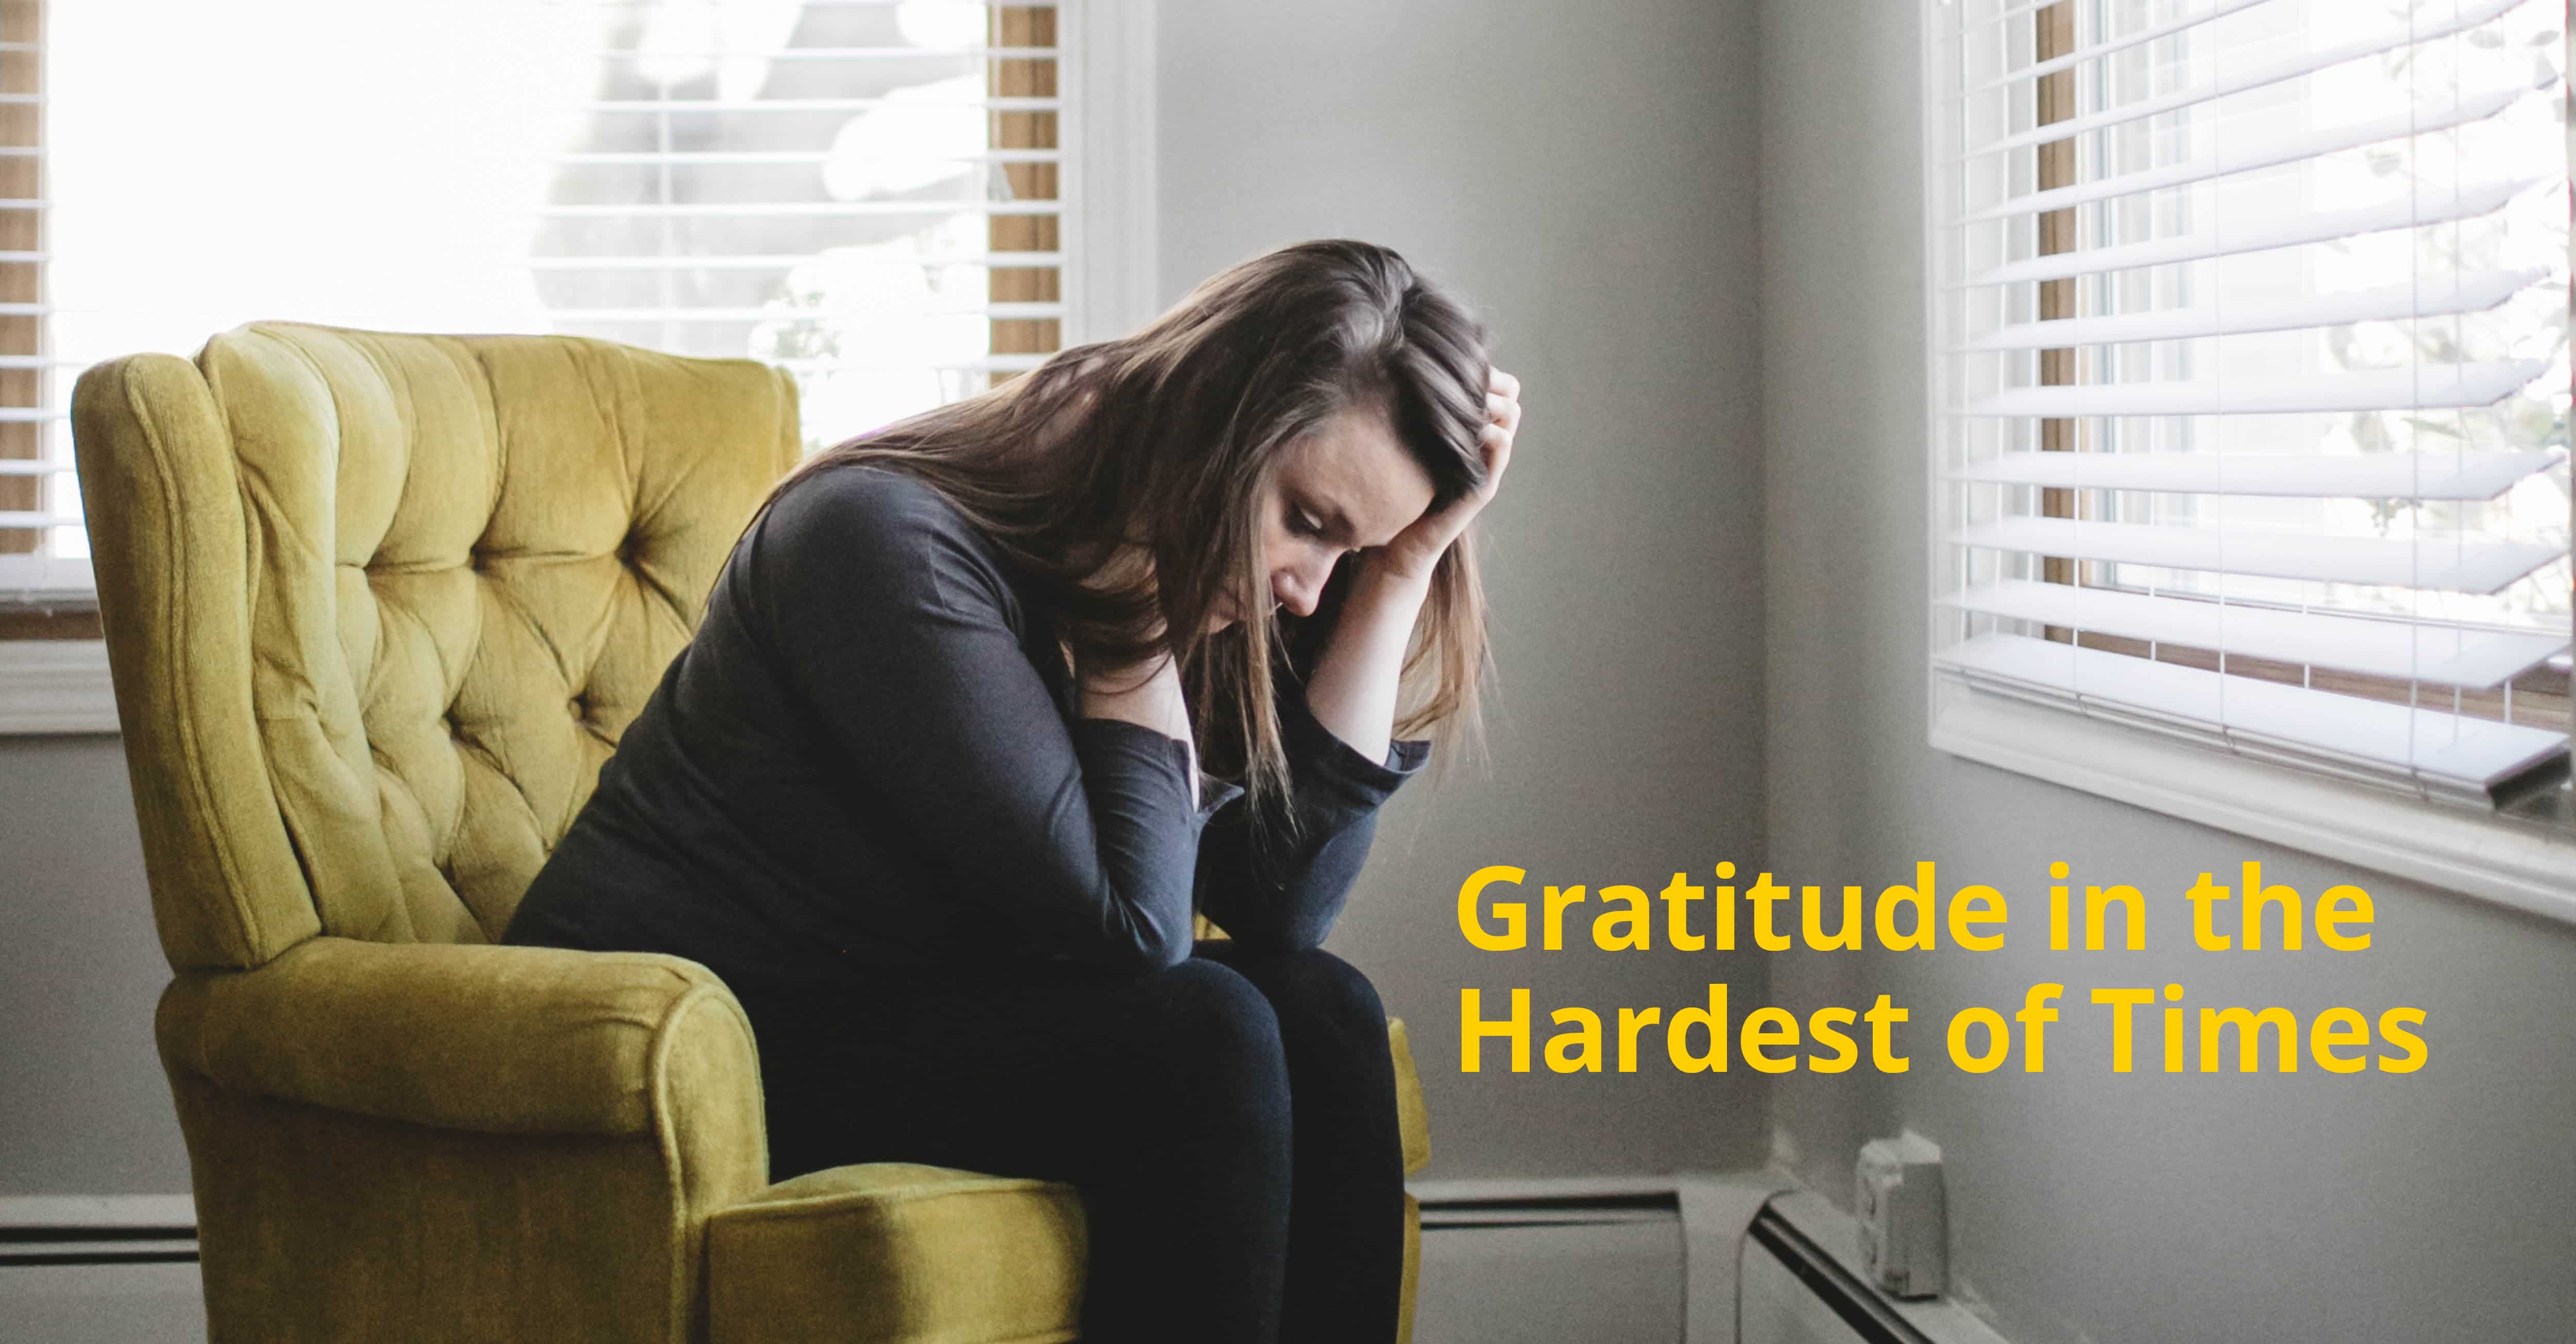 Being Grateful Even in the Hardest of Times